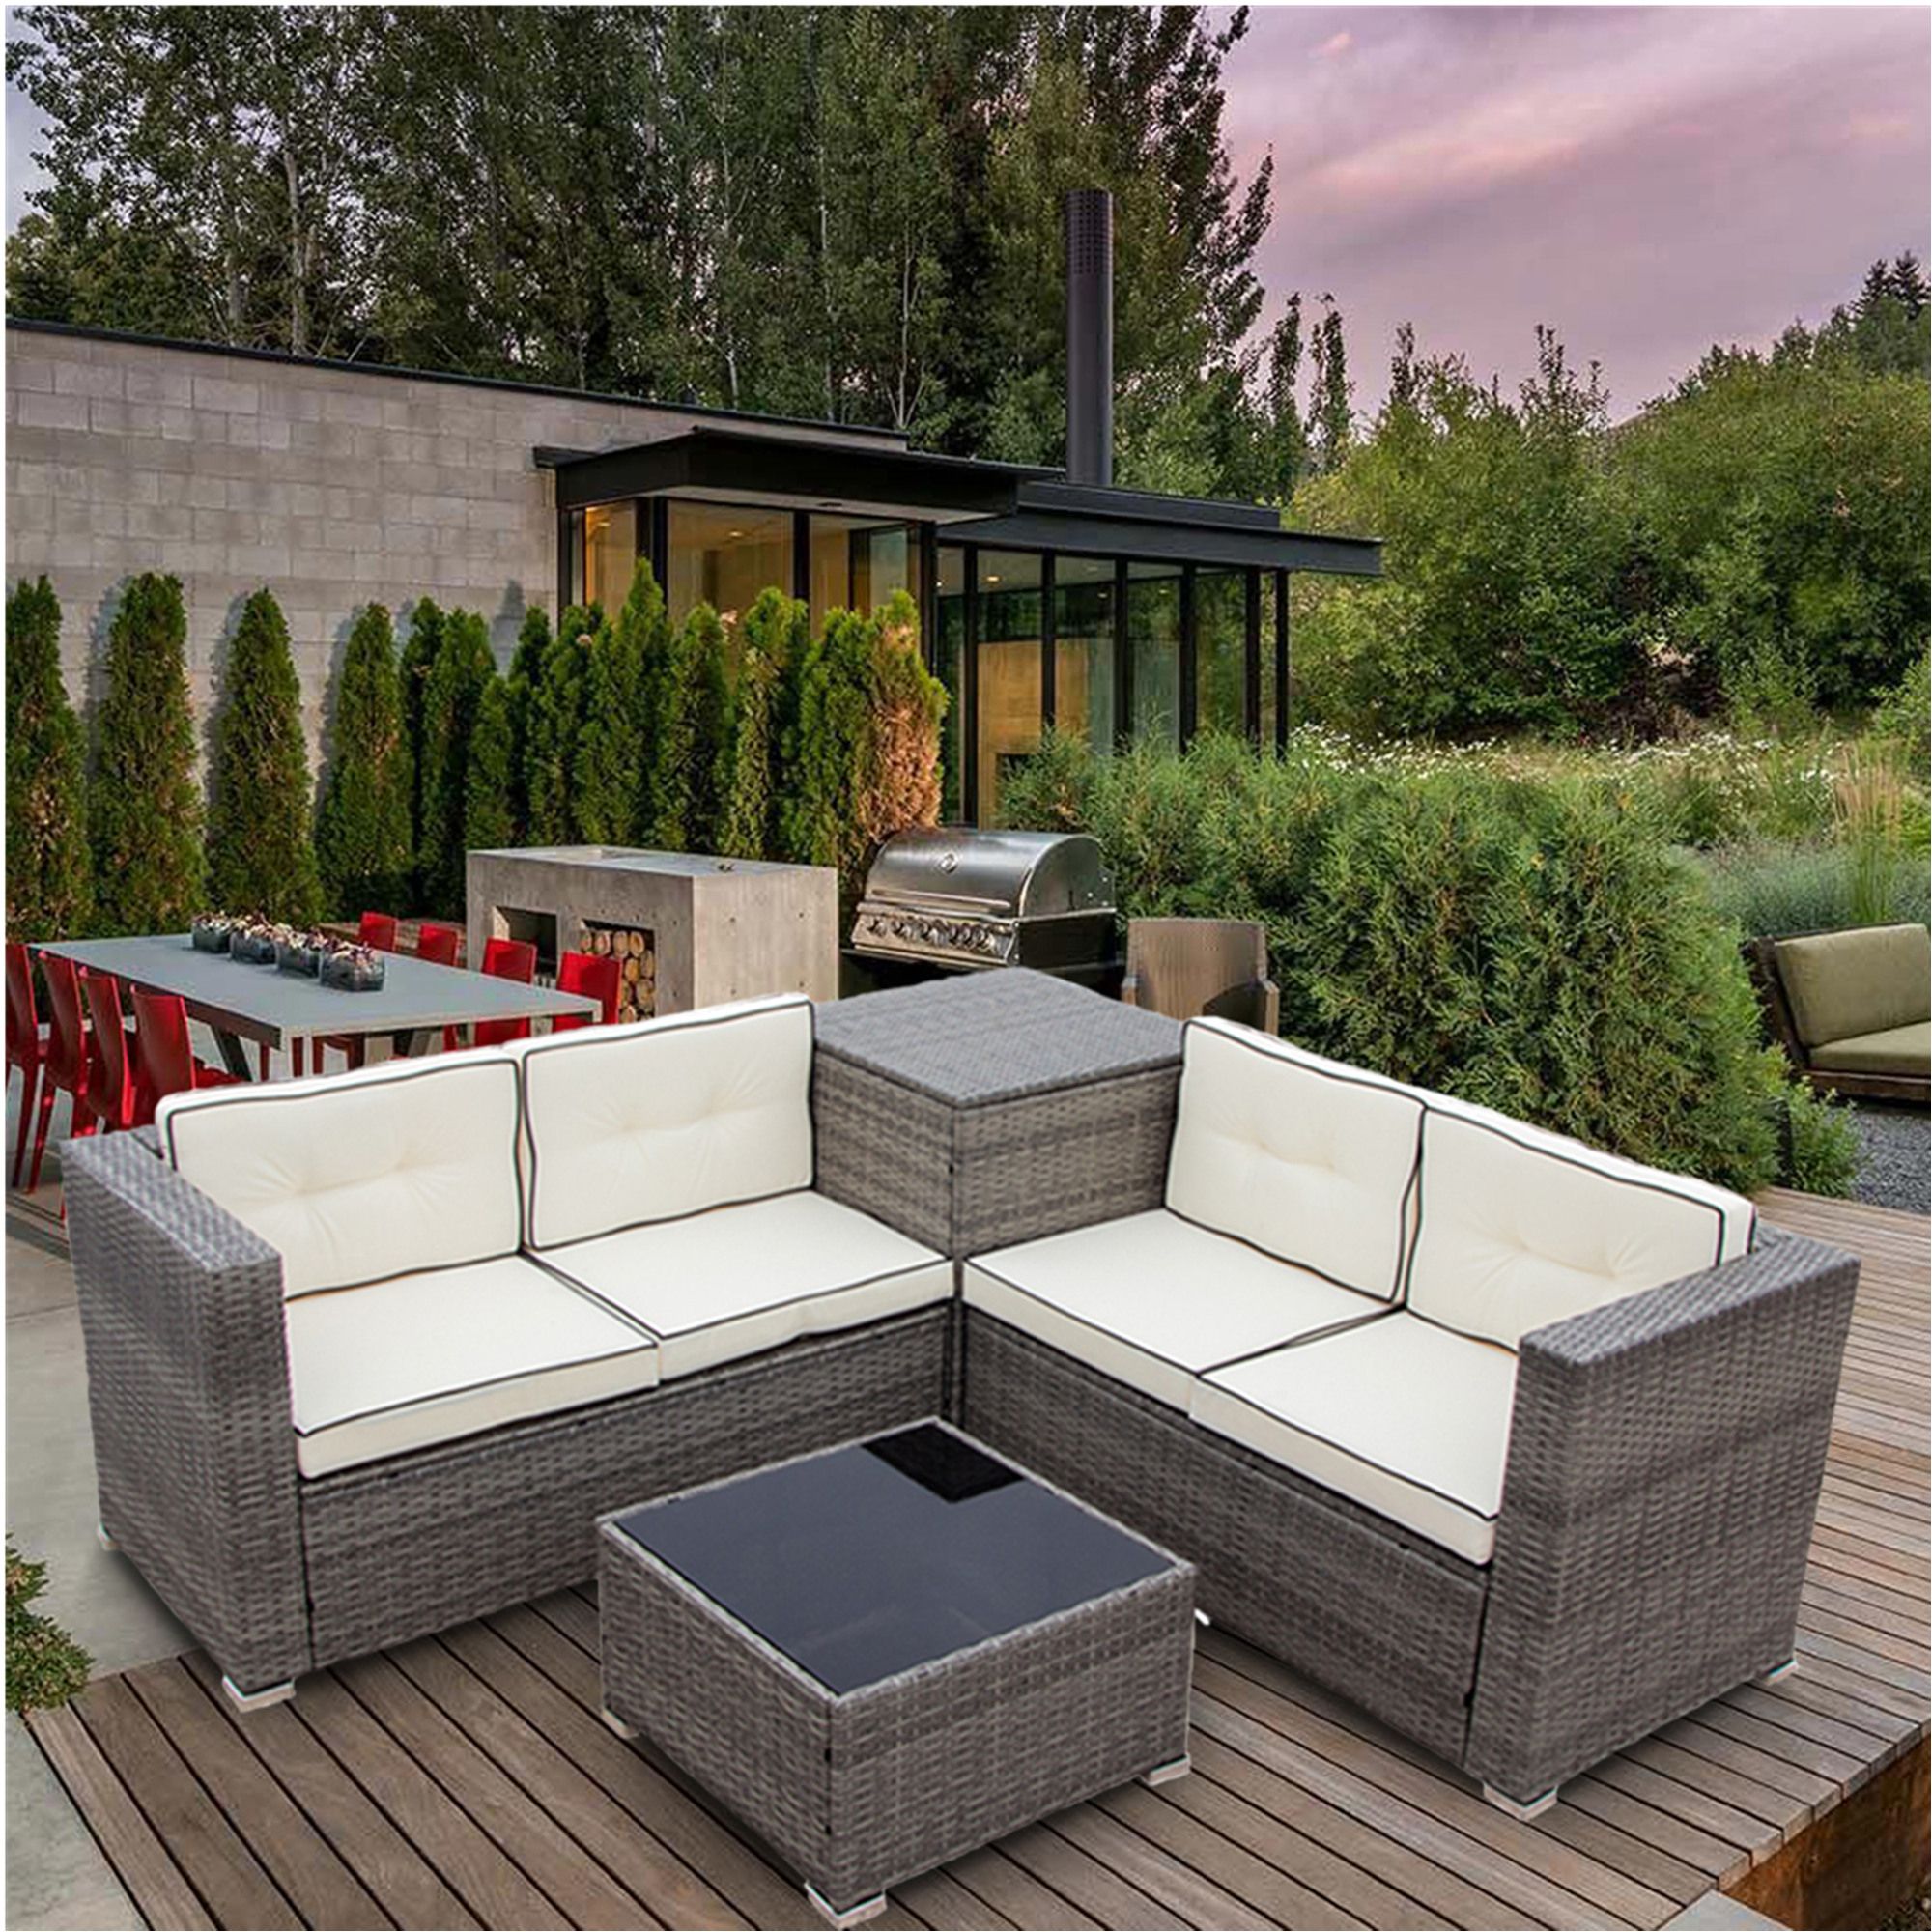 4 Piece Rattan Patio Furniture Sets Clearance, Wicker Bistro Patio Set Throughout 4 Piece Outdoor Seating Patio Sets (View 8 of 15)